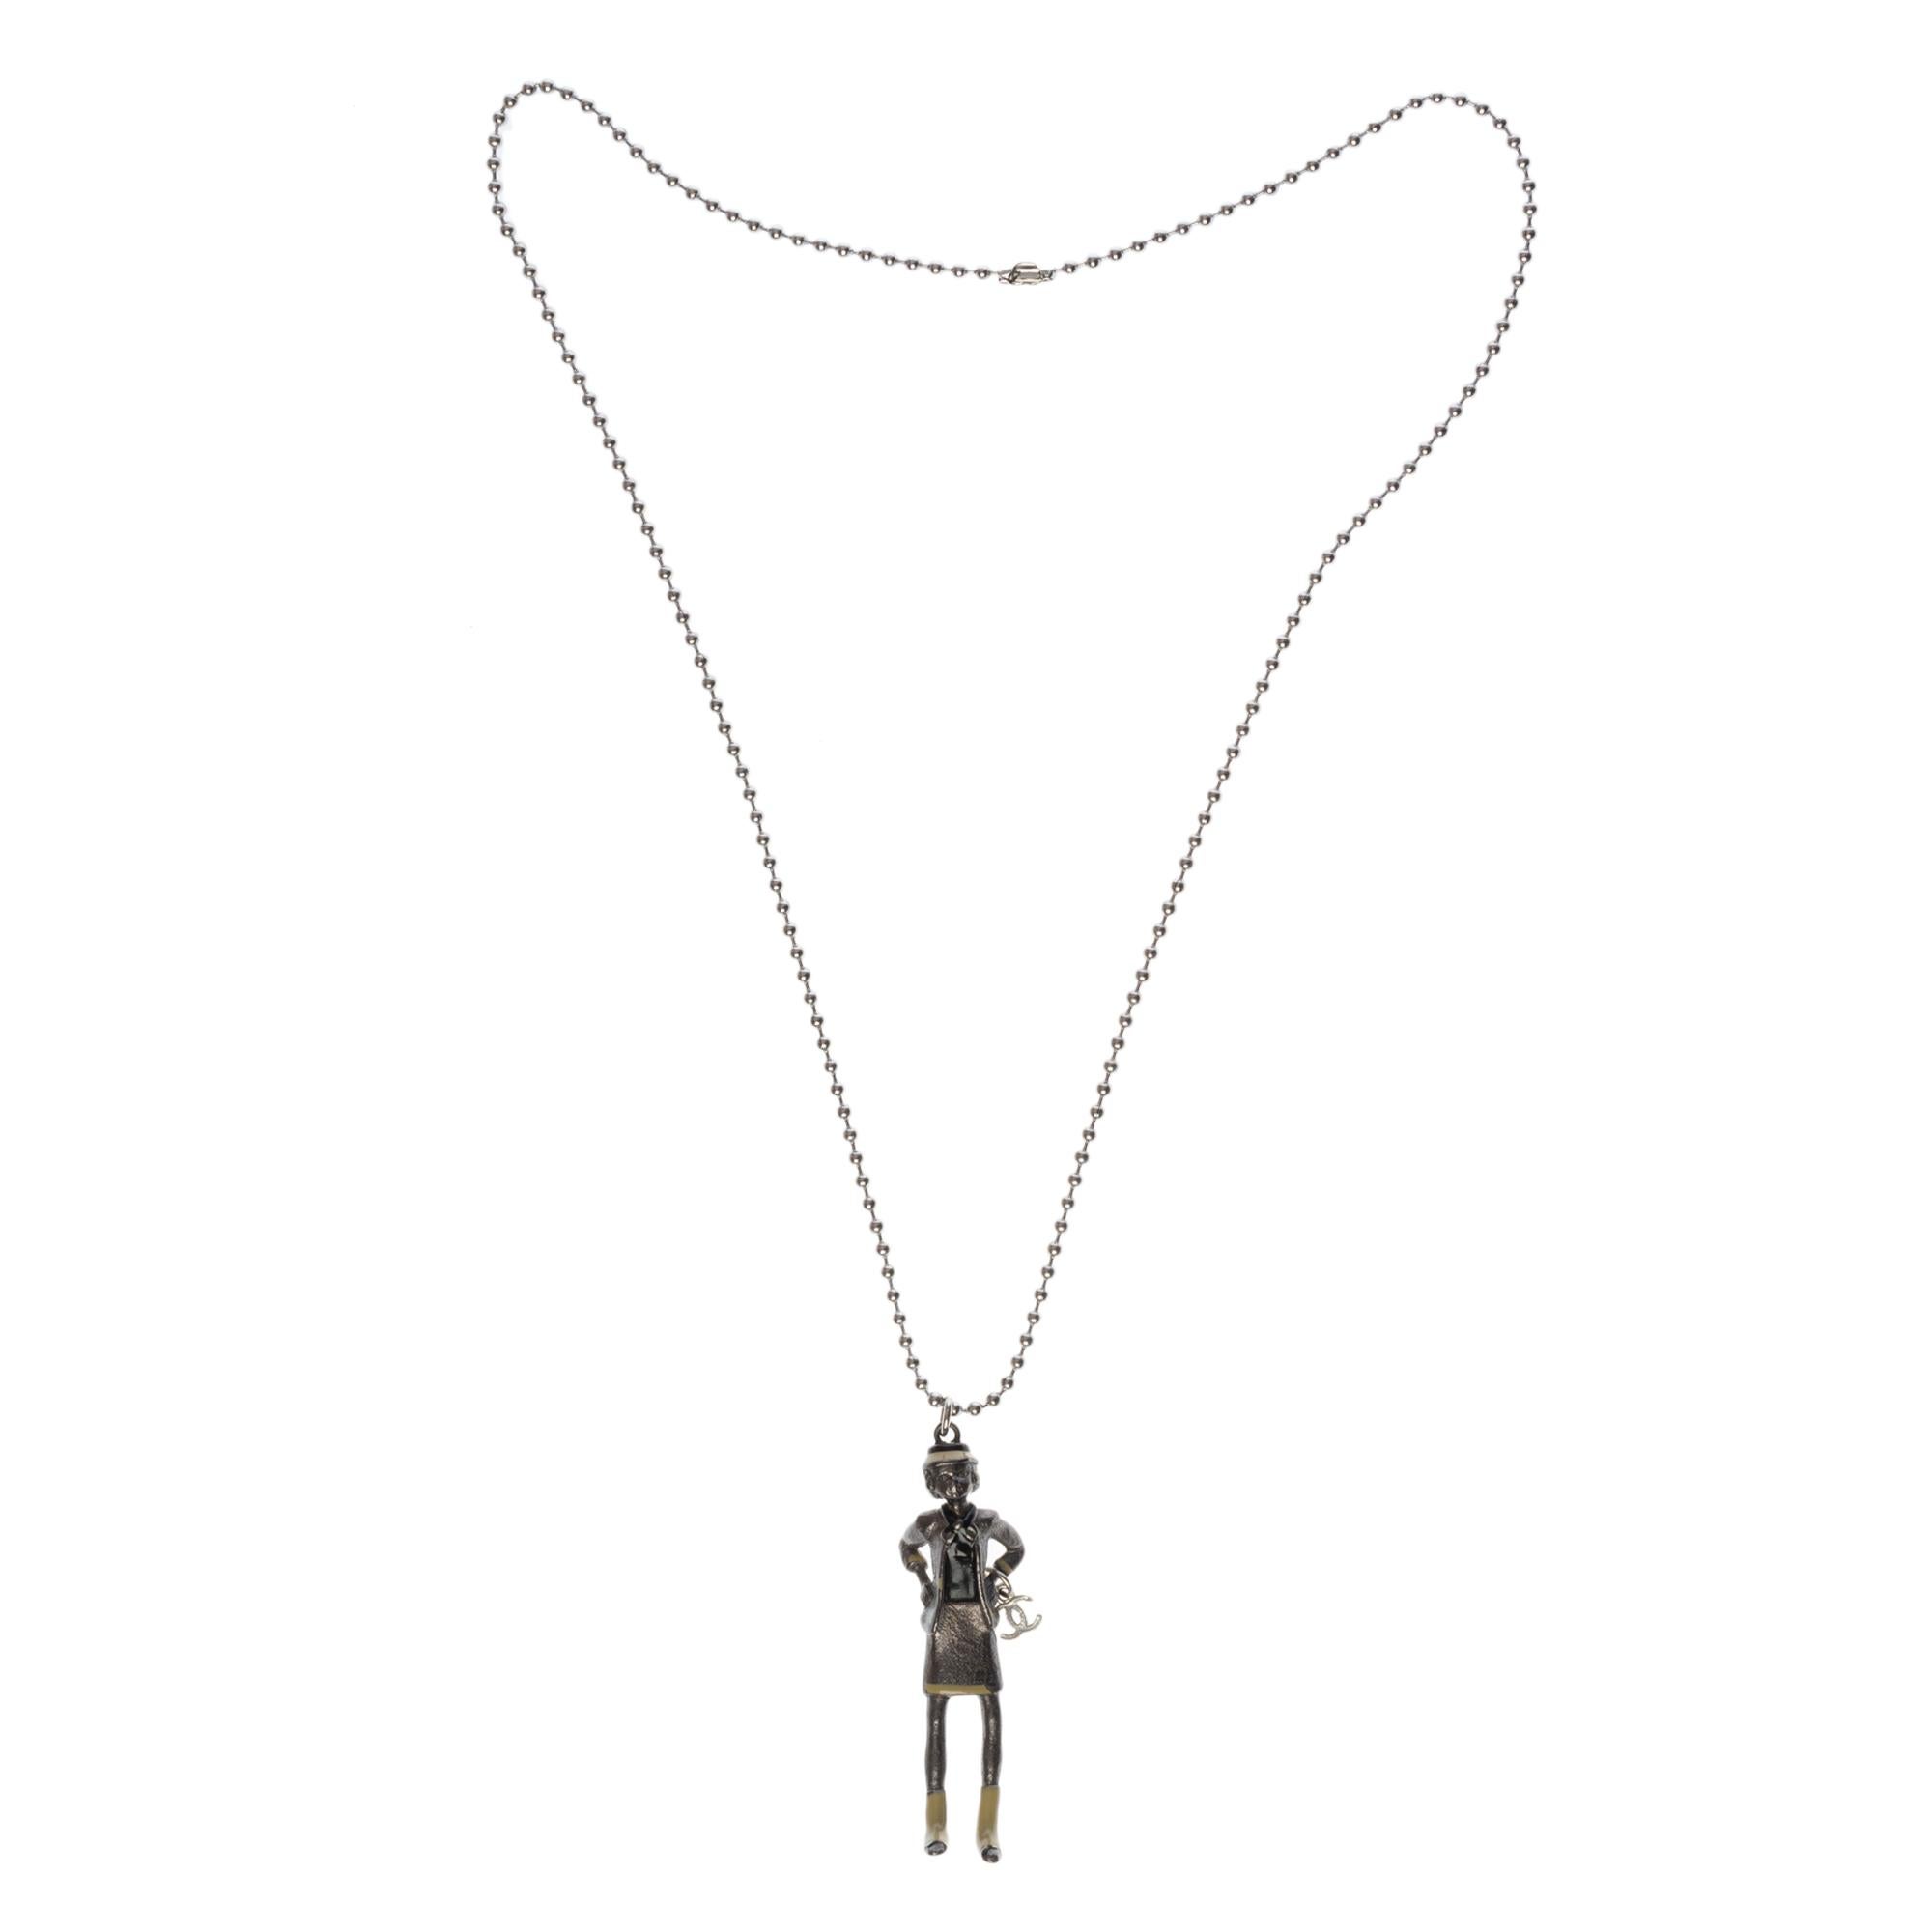 This adorable Coco Chanel Doll Necklace has only been offered to a few VIP customers as a special gift and has never been sold in Chanel stores.
You can use the Choco Chanel doll with a shorter silver metal chain as a charm for your bag or also as a